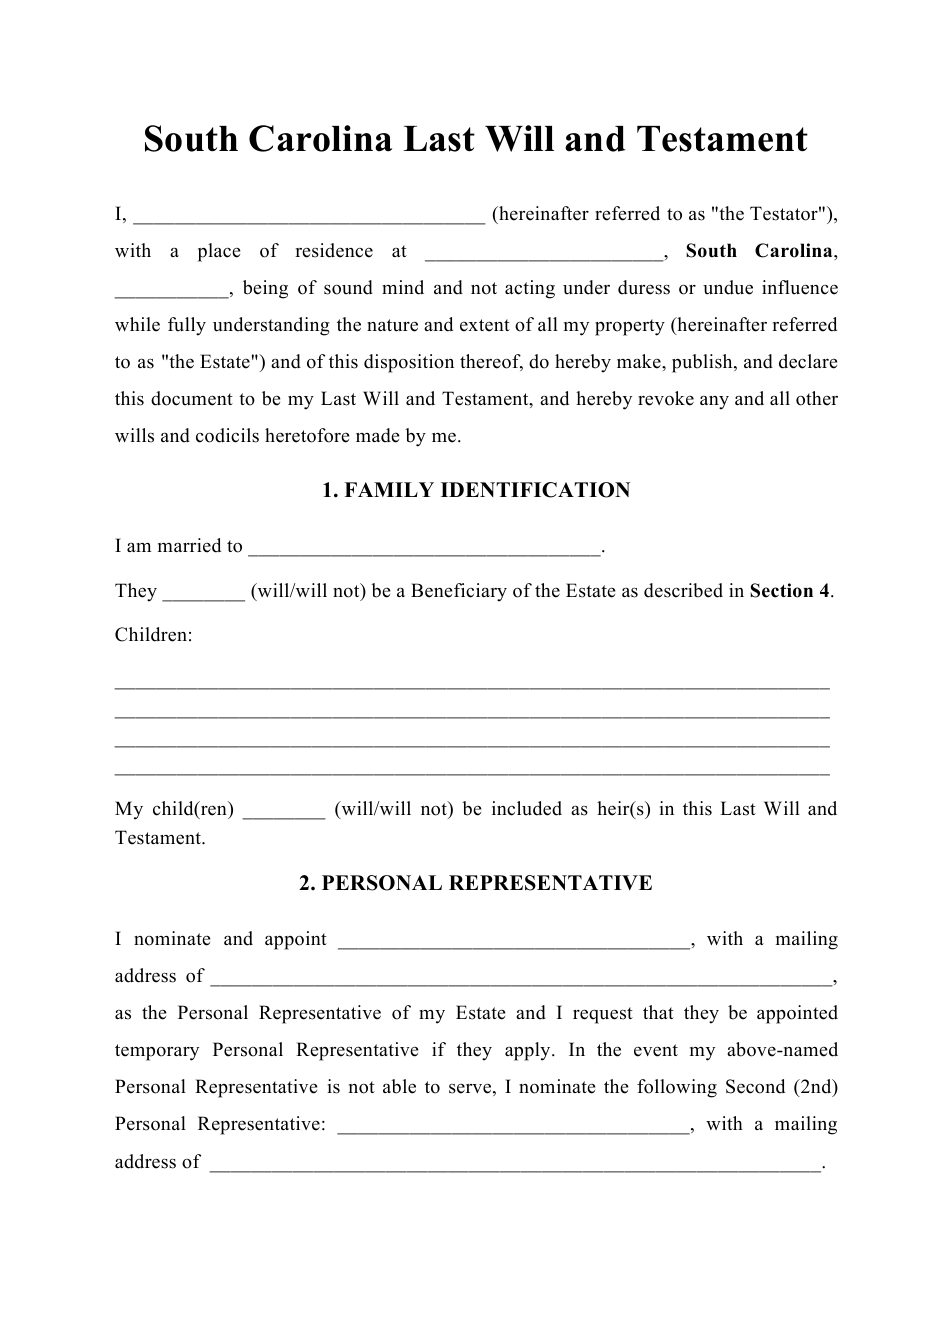 South Carolina Last Will And Testament Template Download Printable PDF